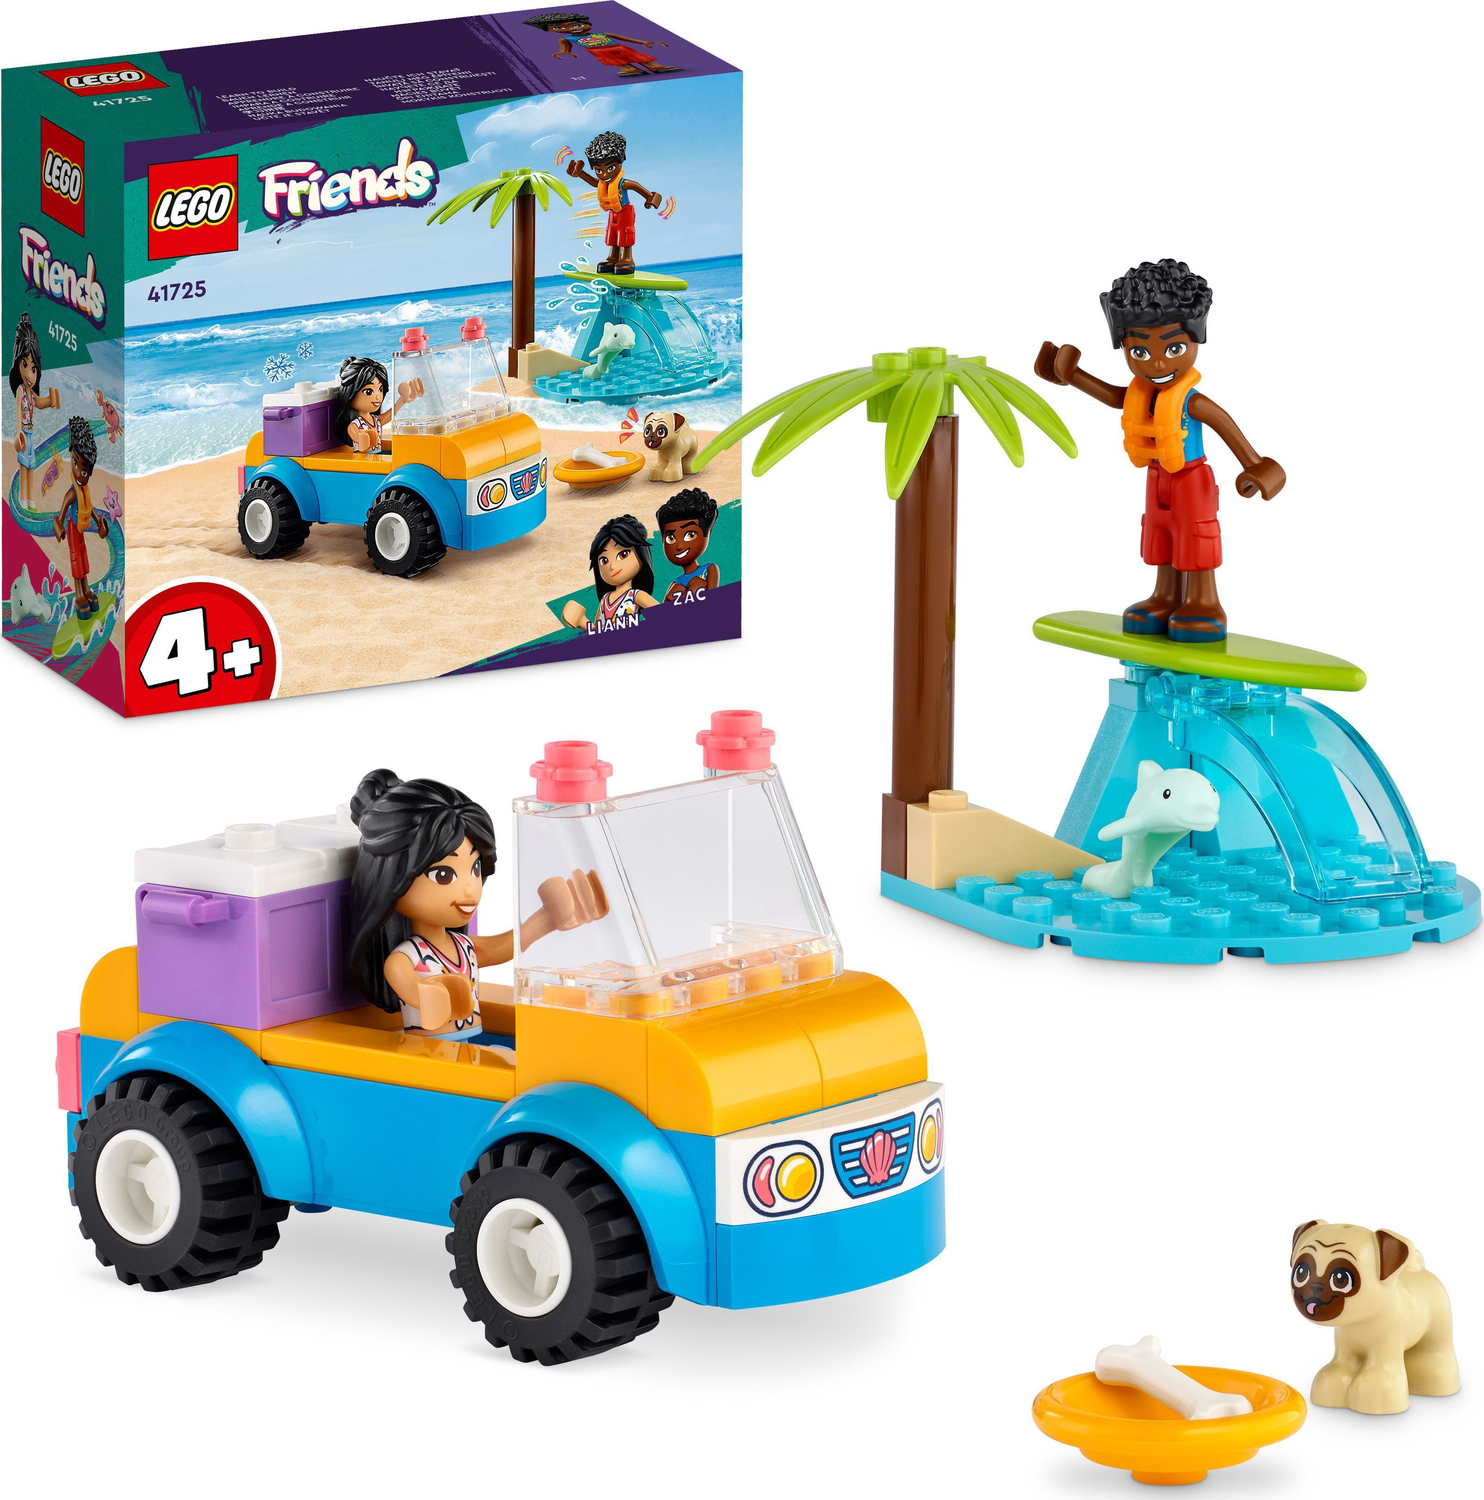 LEGO Friends Beach Buggy Fun Set with Toy Car - The Toy Box Hanover